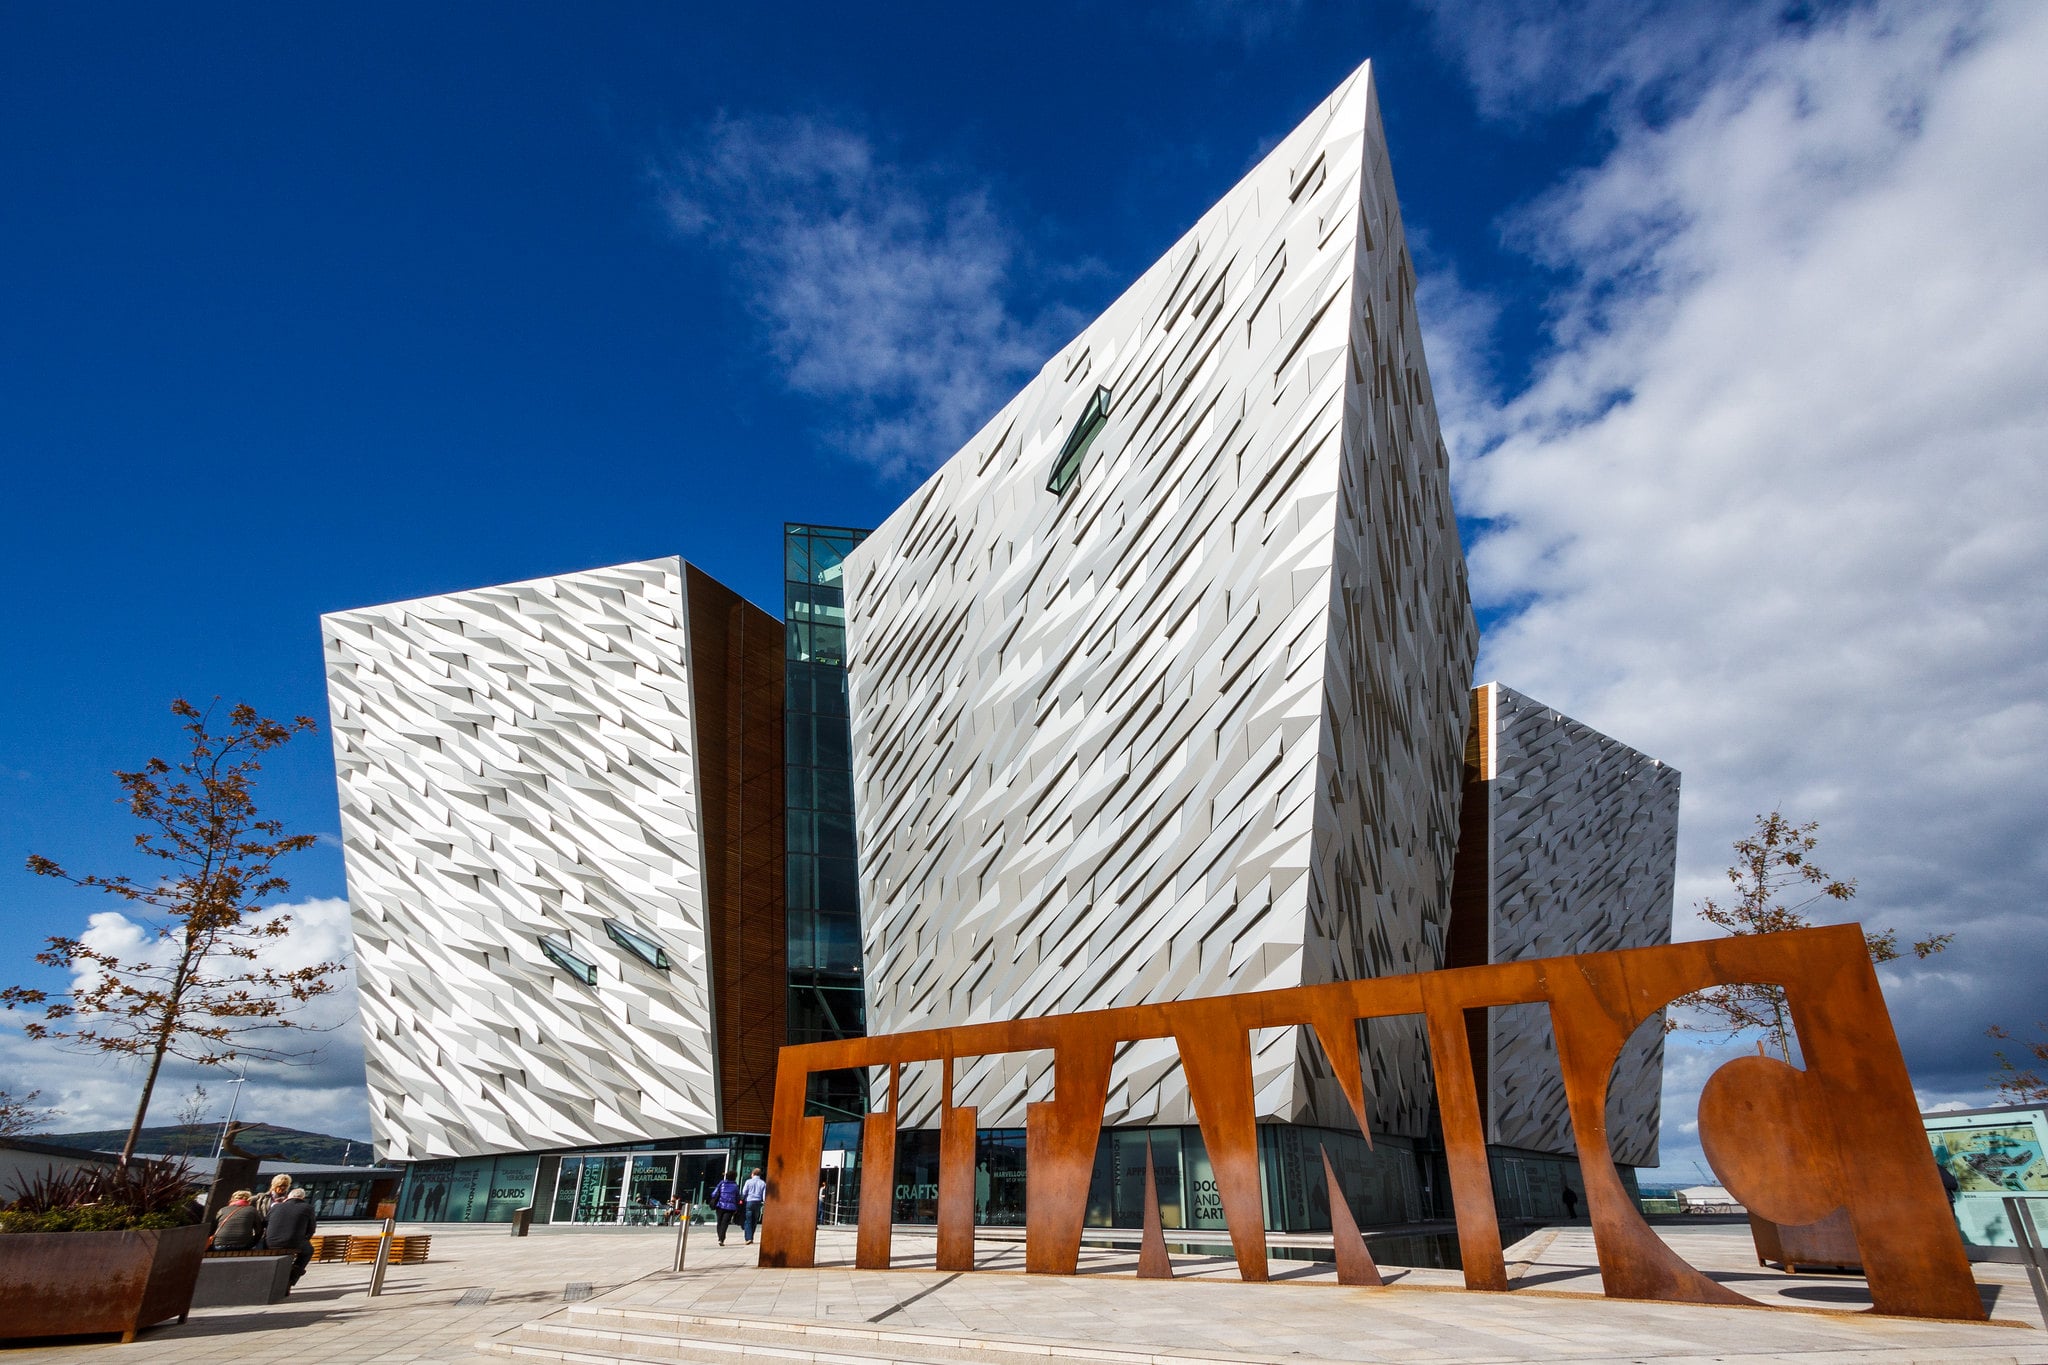 Exploring the Titanic Belfast museum is one of the coolest things to do in Northern Ireland